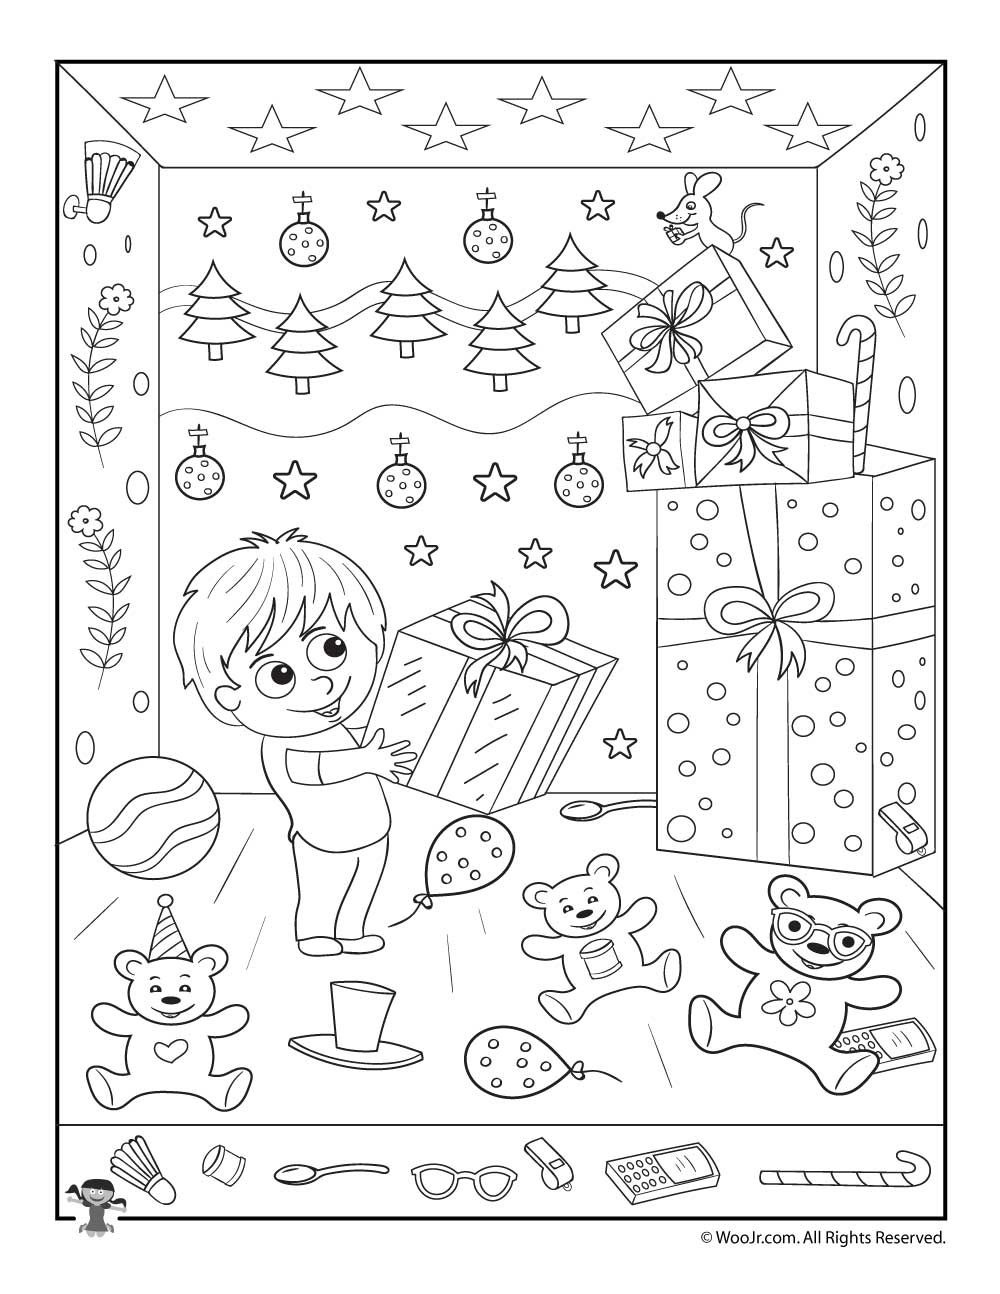 Christmas Gifts Hidden Picture Printable Activity | Merry Christmas - Free Printable Christmas Hidden Picture Games